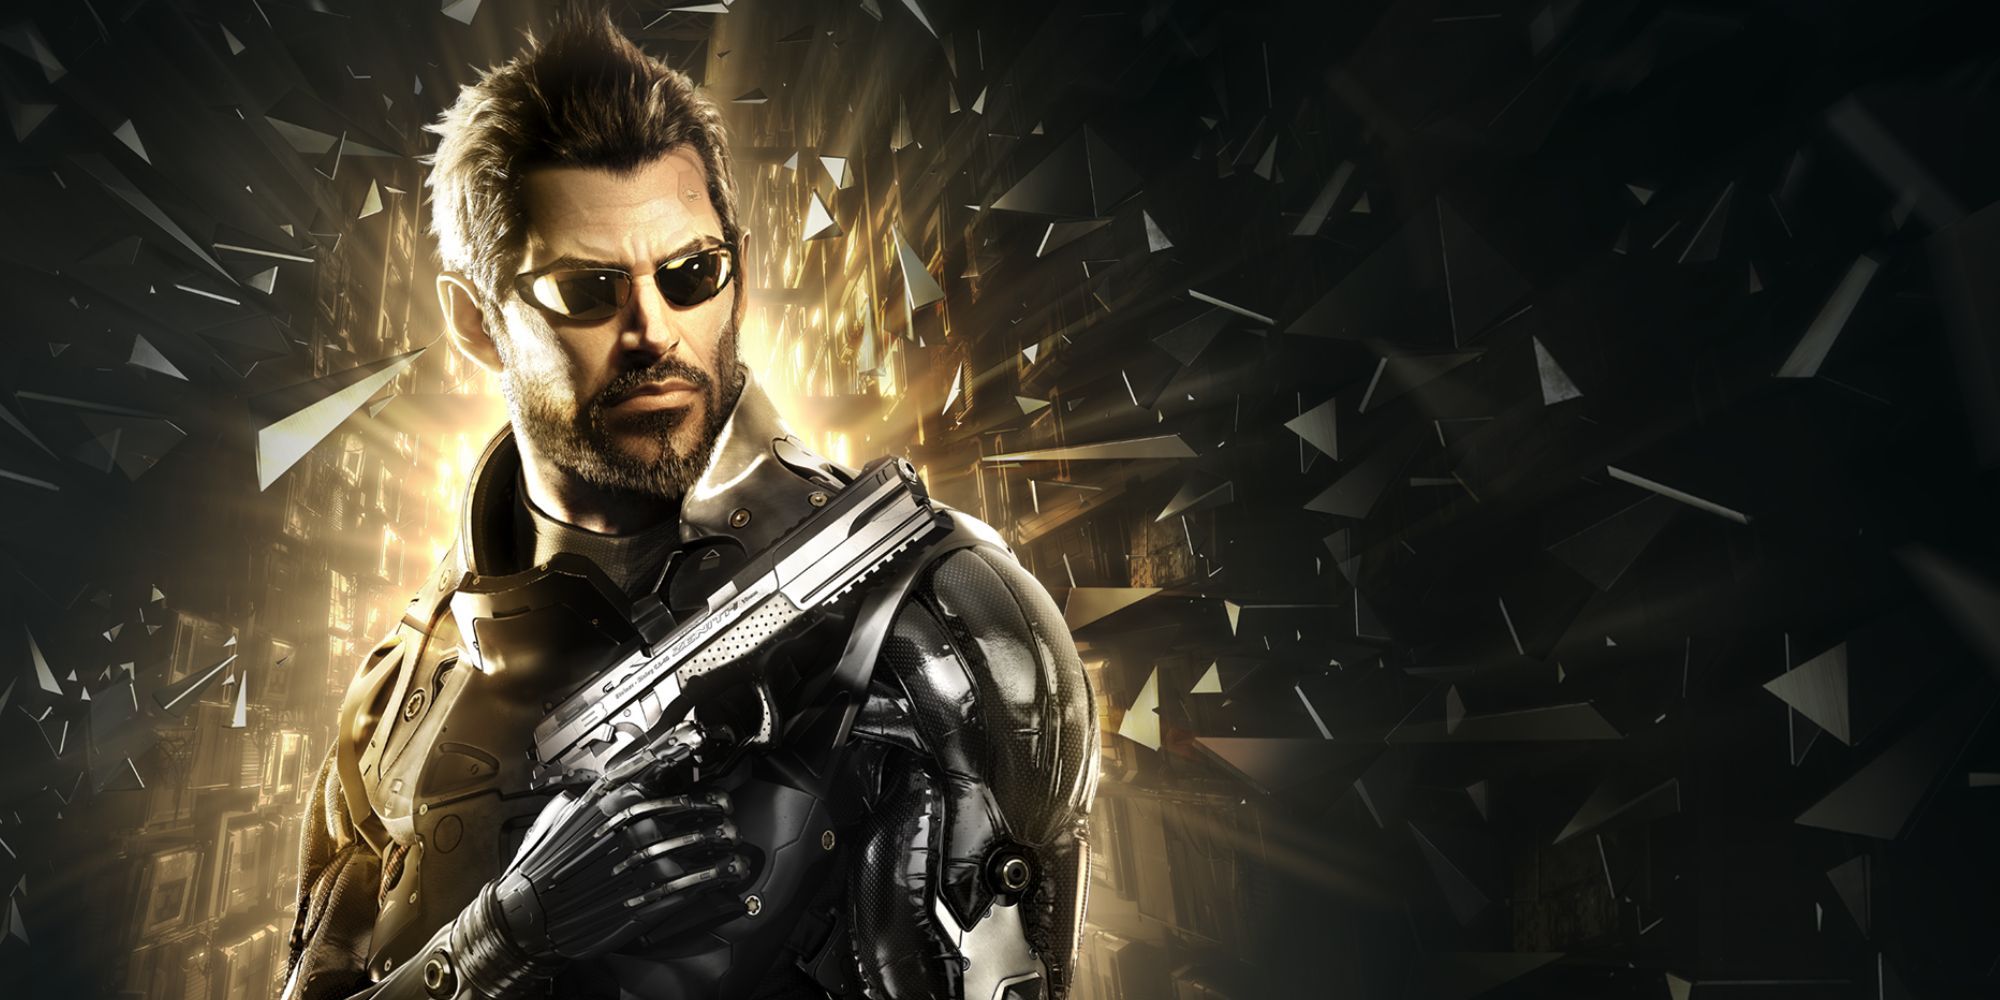 The main character of Deus Ex Mankind Divided wearing sunglases and armour, wielding a pistol